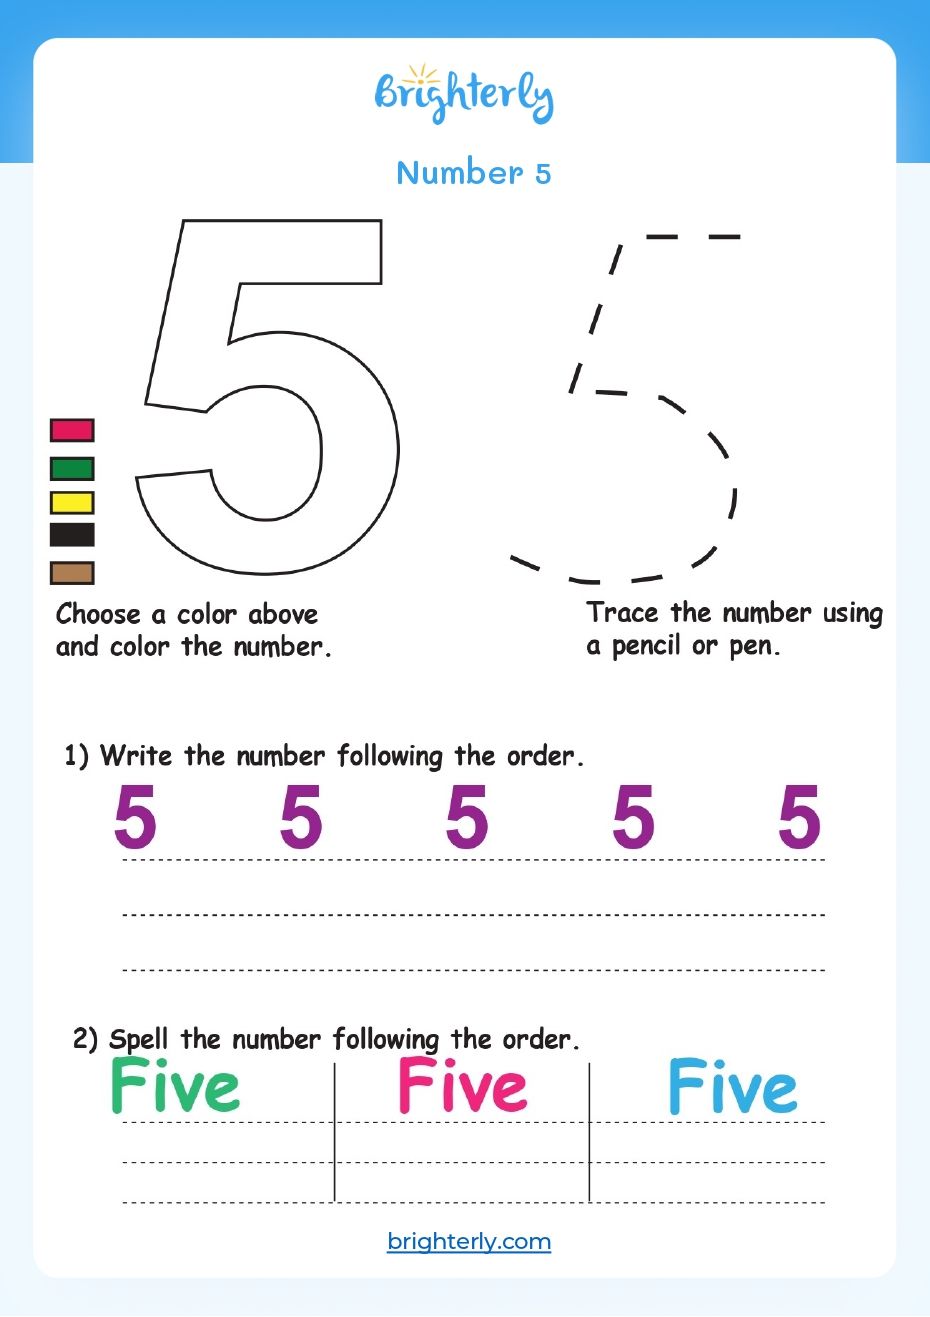 free-printable-number-5-five-worksheets-for-kids-pdfs-brighterly